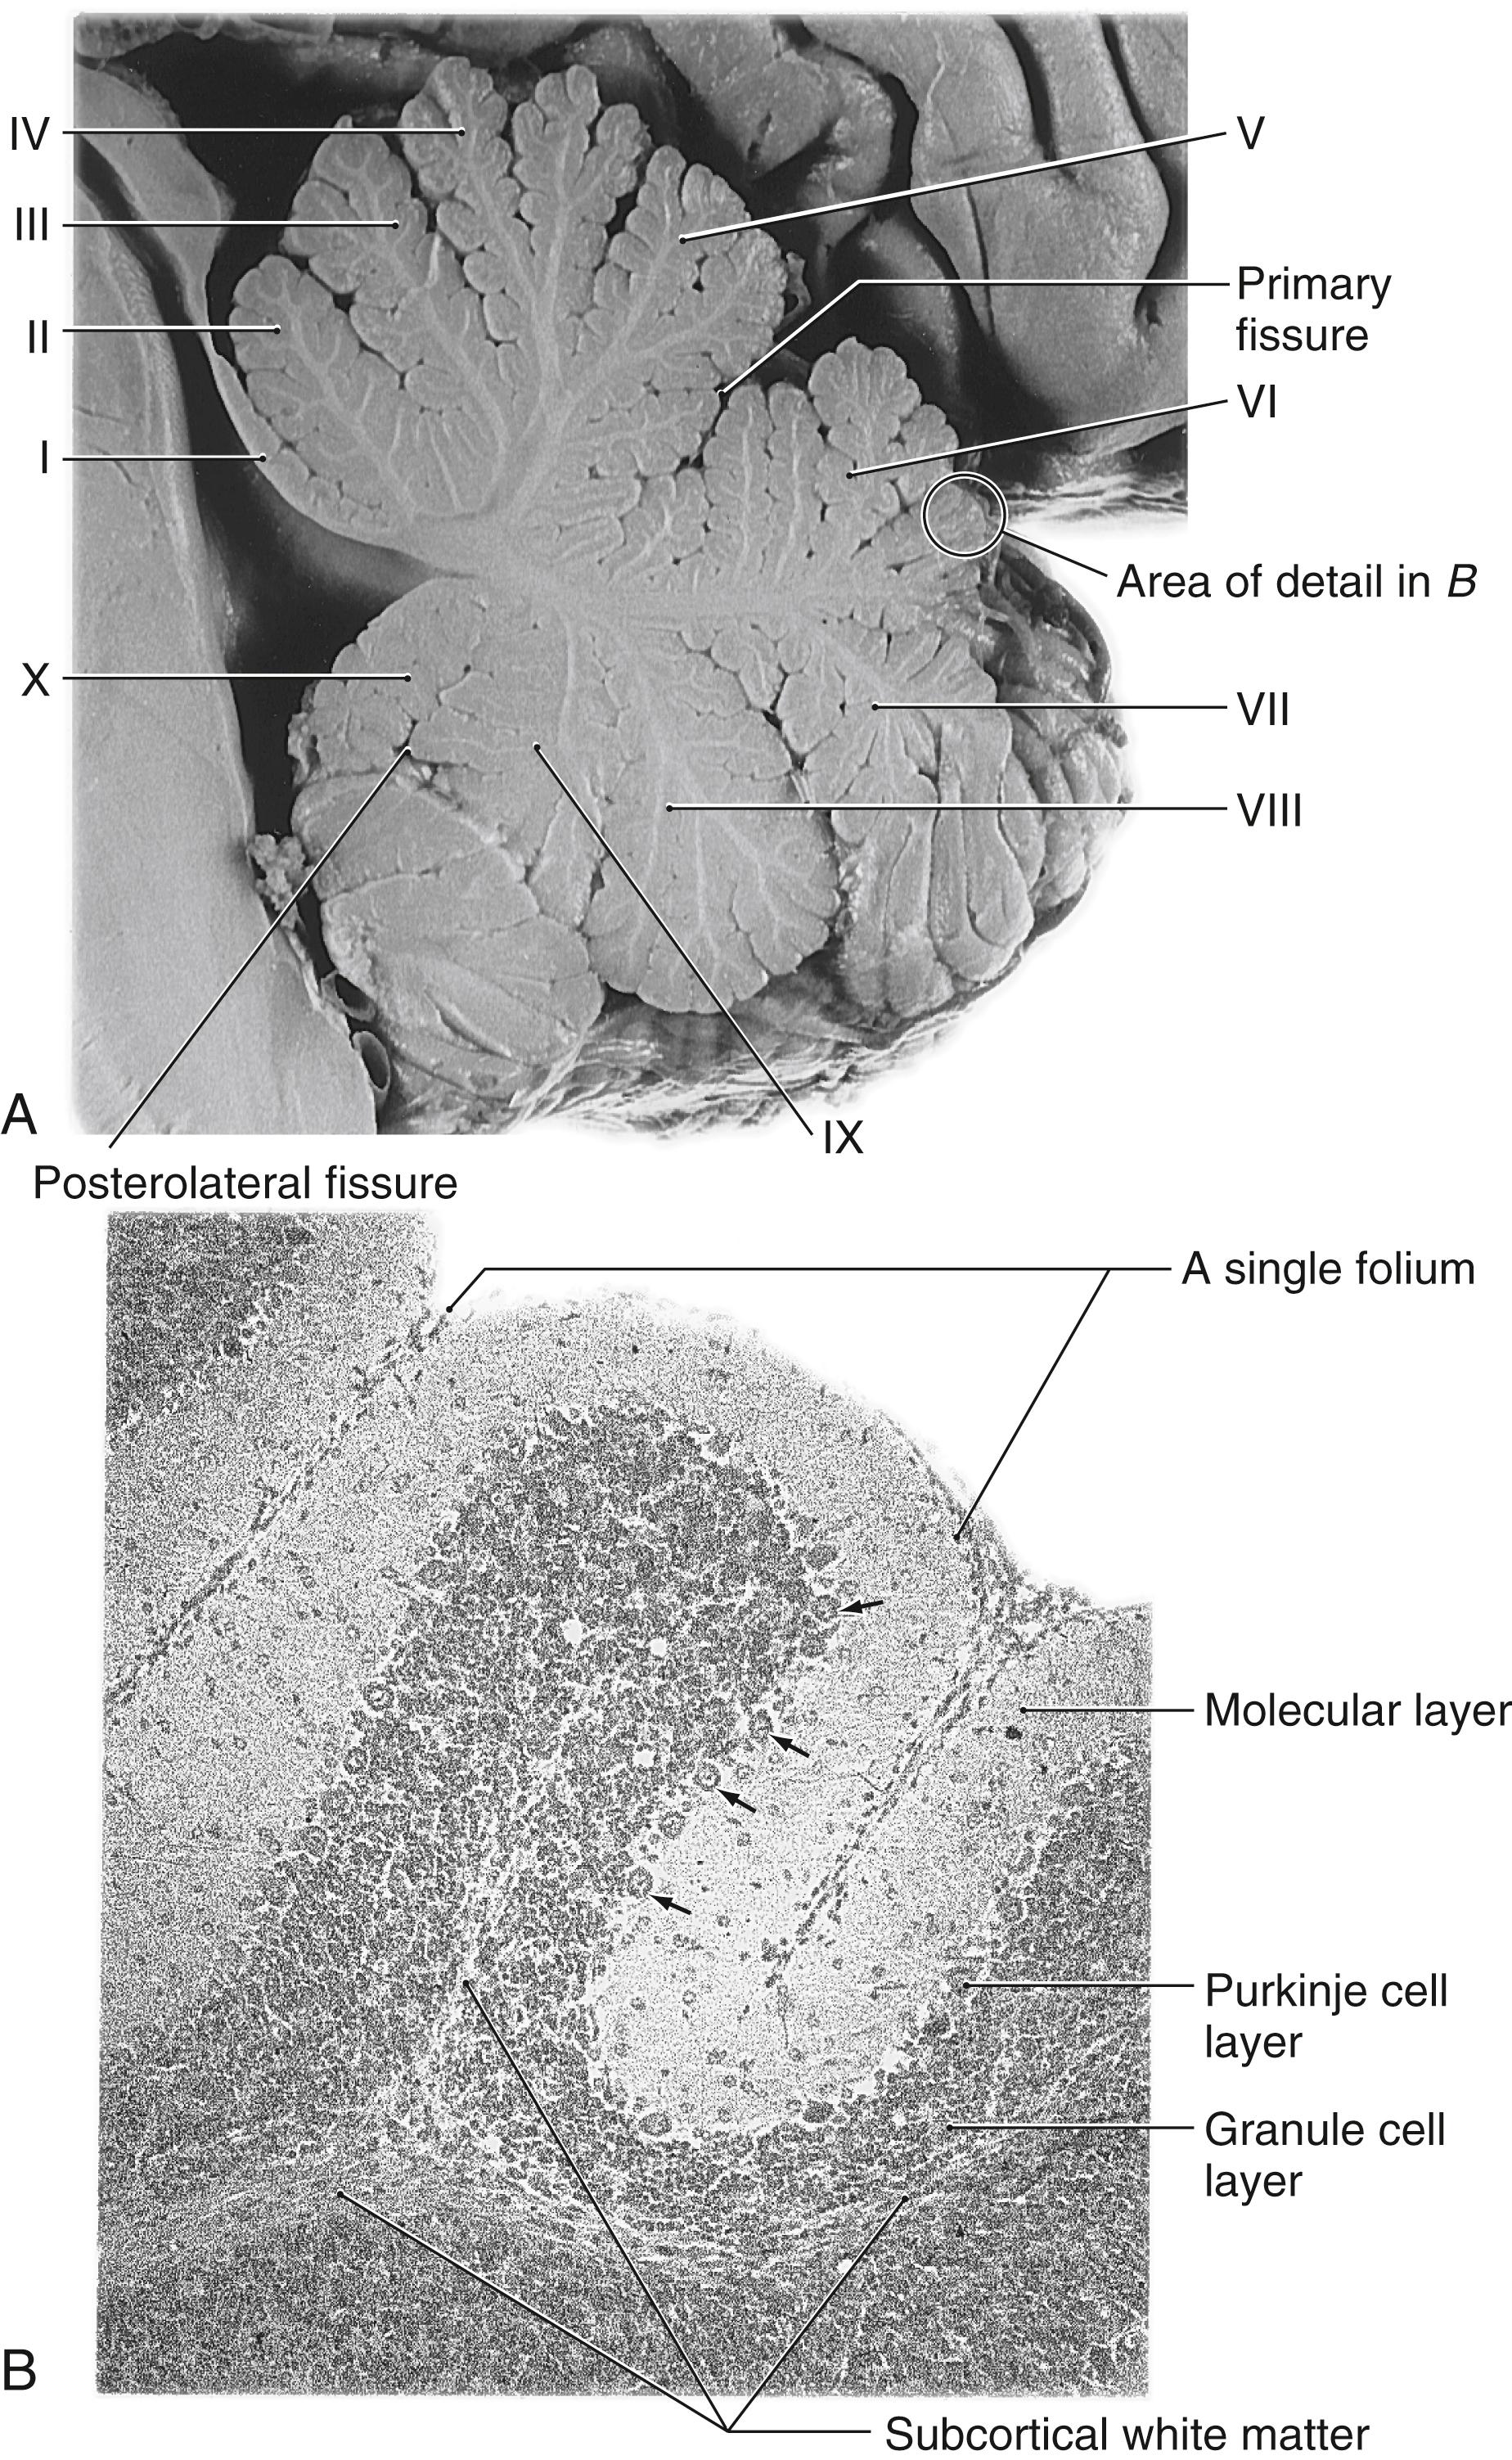 Fig. 27.8, Midsagittal view ( A ) of the cerebellum showing the main fissures and lobules and a detail ( B ) of the cortex showing the cortical layers as seen in a neutral red–stained section. Arrows point to representative Purkinje cell bodies.